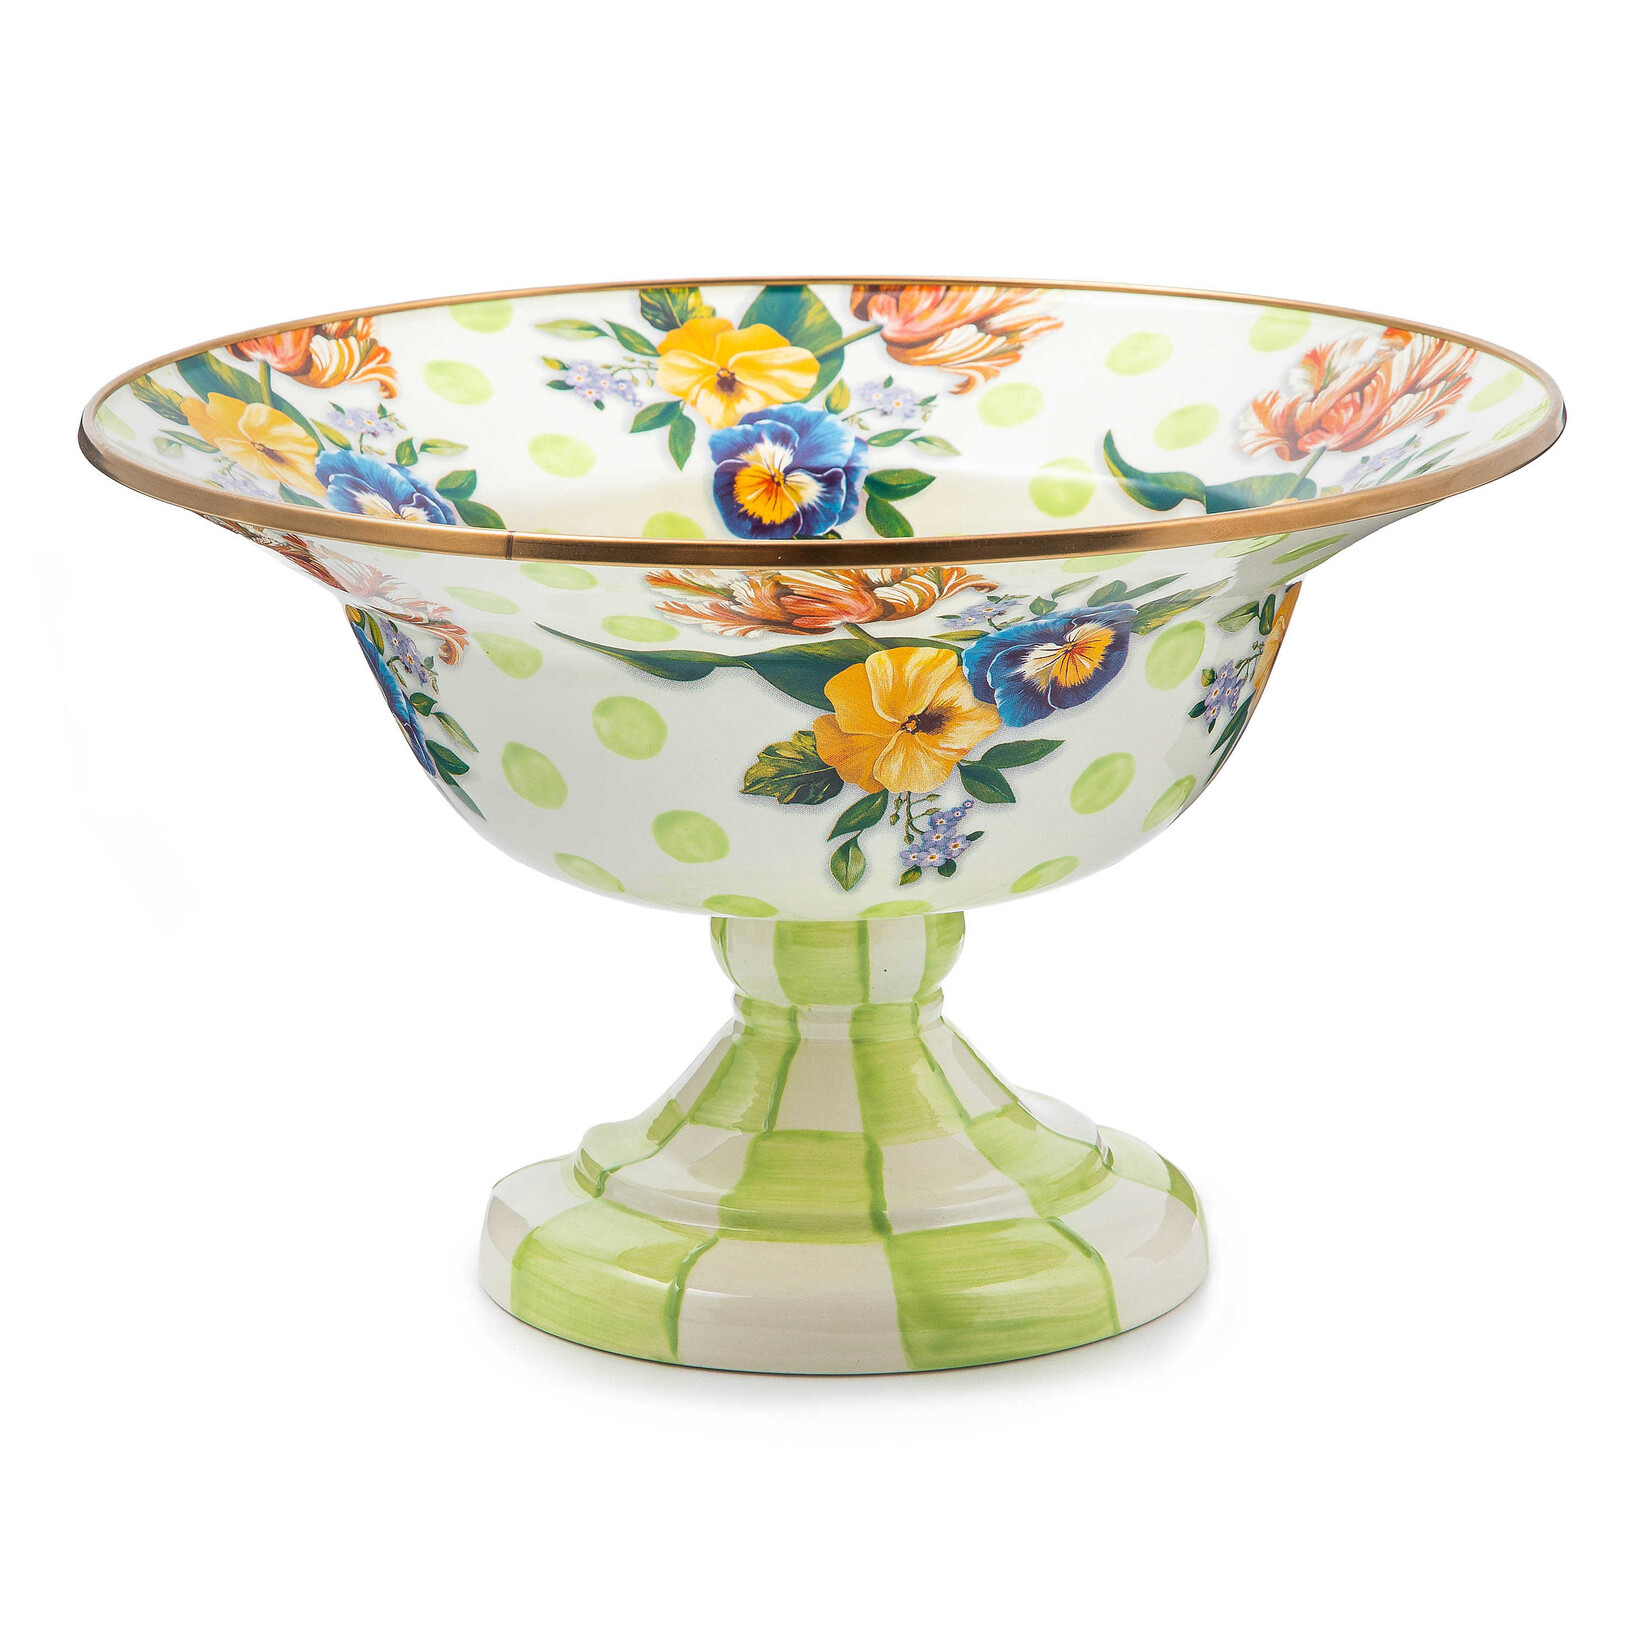 MacKenzie-Childs wildflowers enamel large compote - green